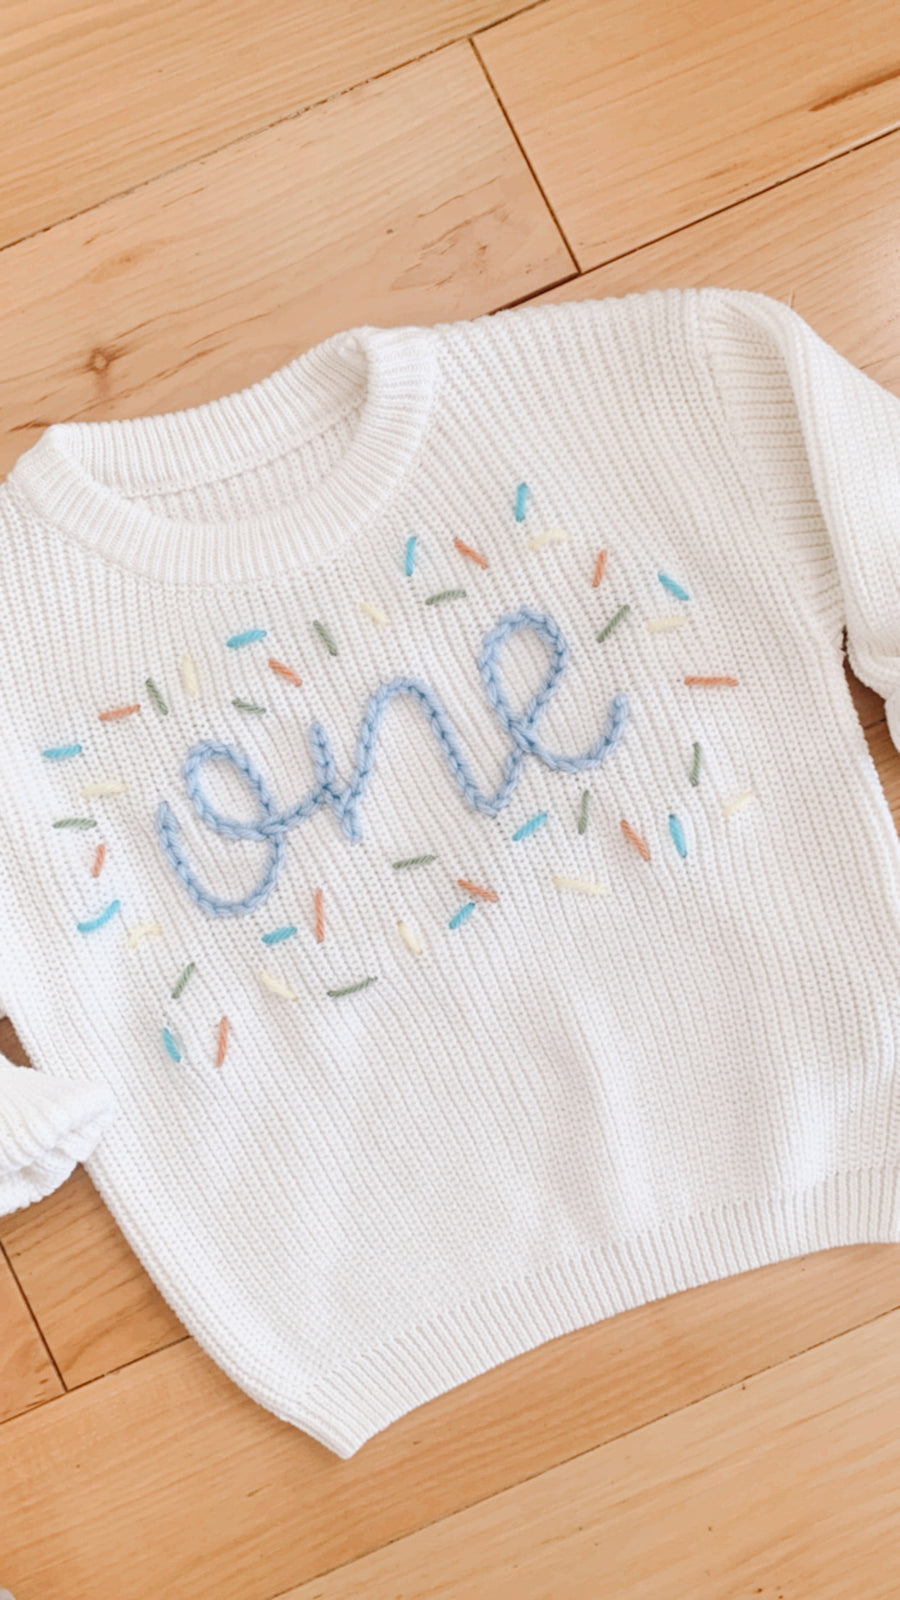 BIRTHDAY Hand-embroidered Chunky Sweater - White